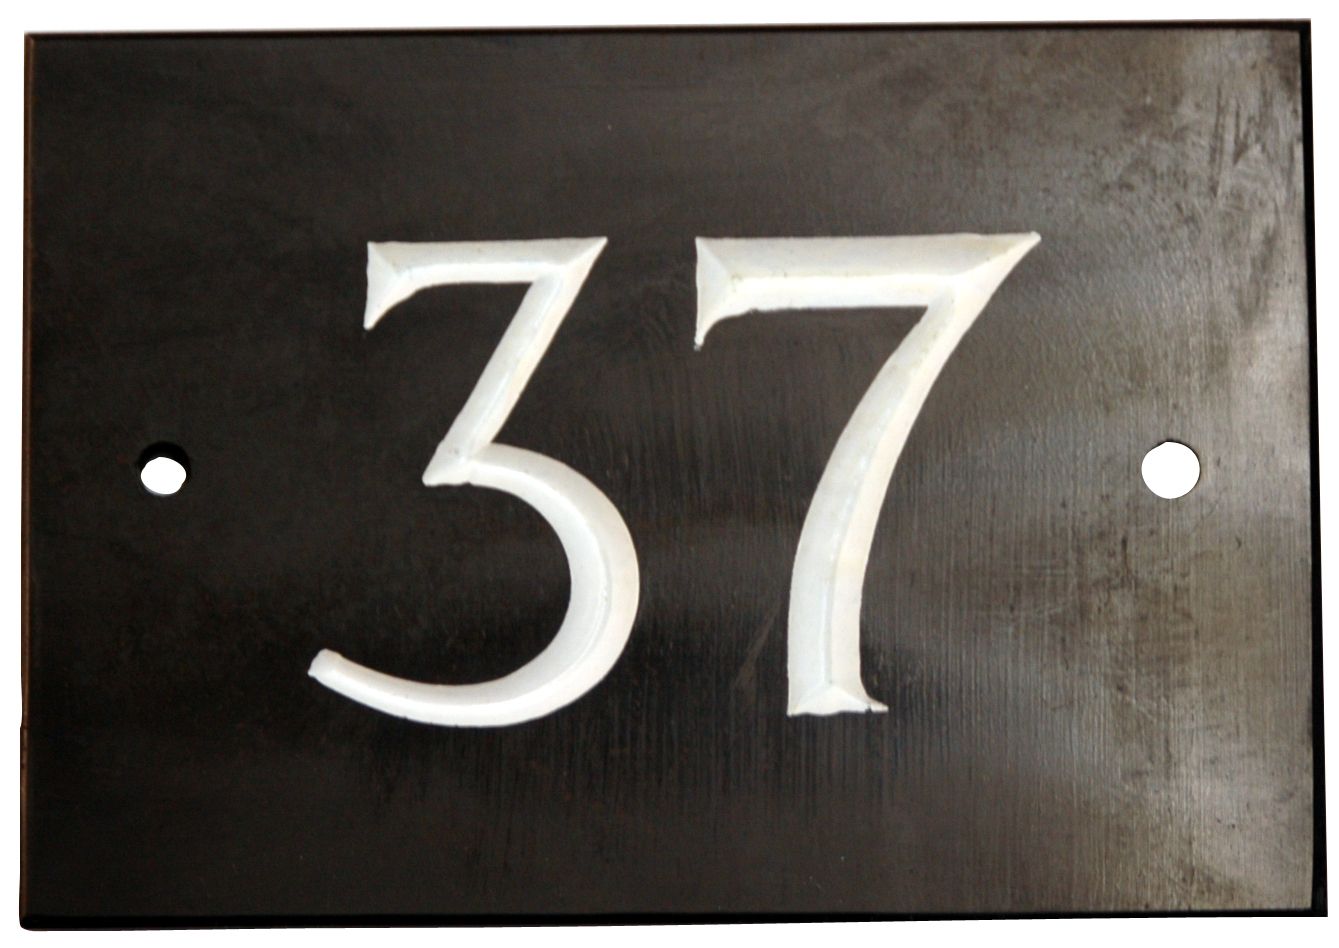 The House Nameplate Company Black & white Slate Rectangular House number 37, (H)102mm (W)140mm